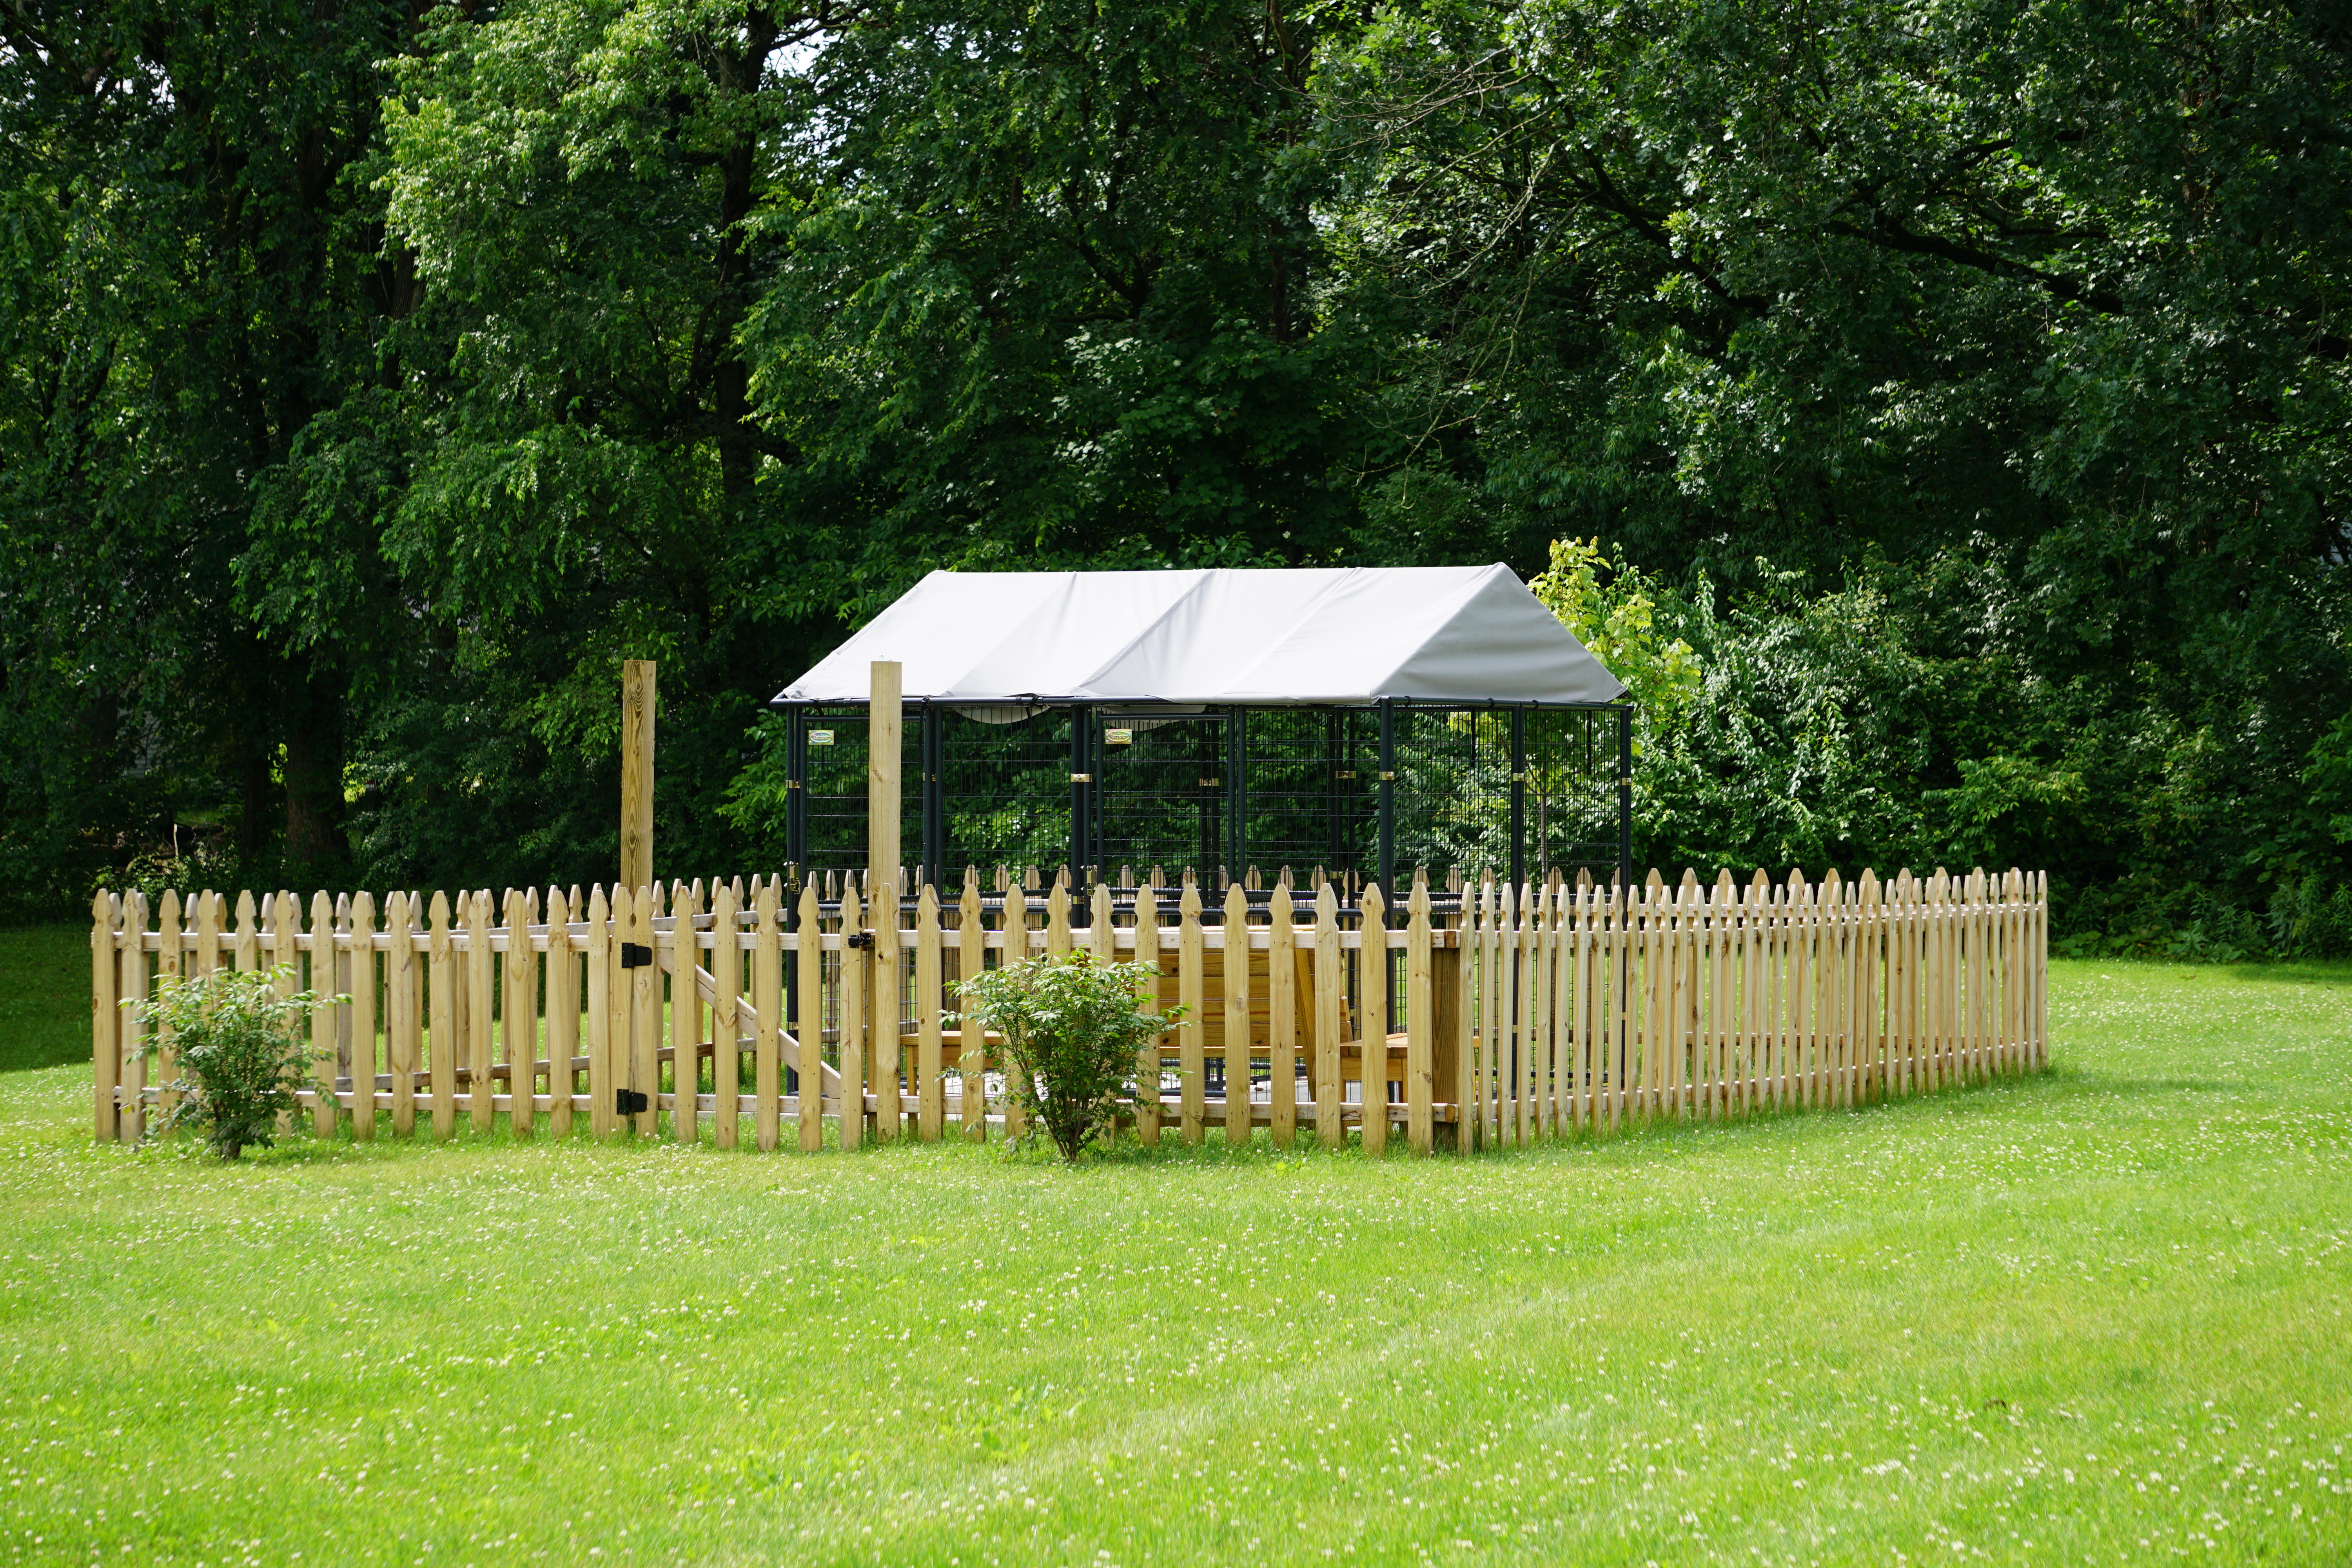 Image of outdoor kennel with short food fence surrounding it and green yard